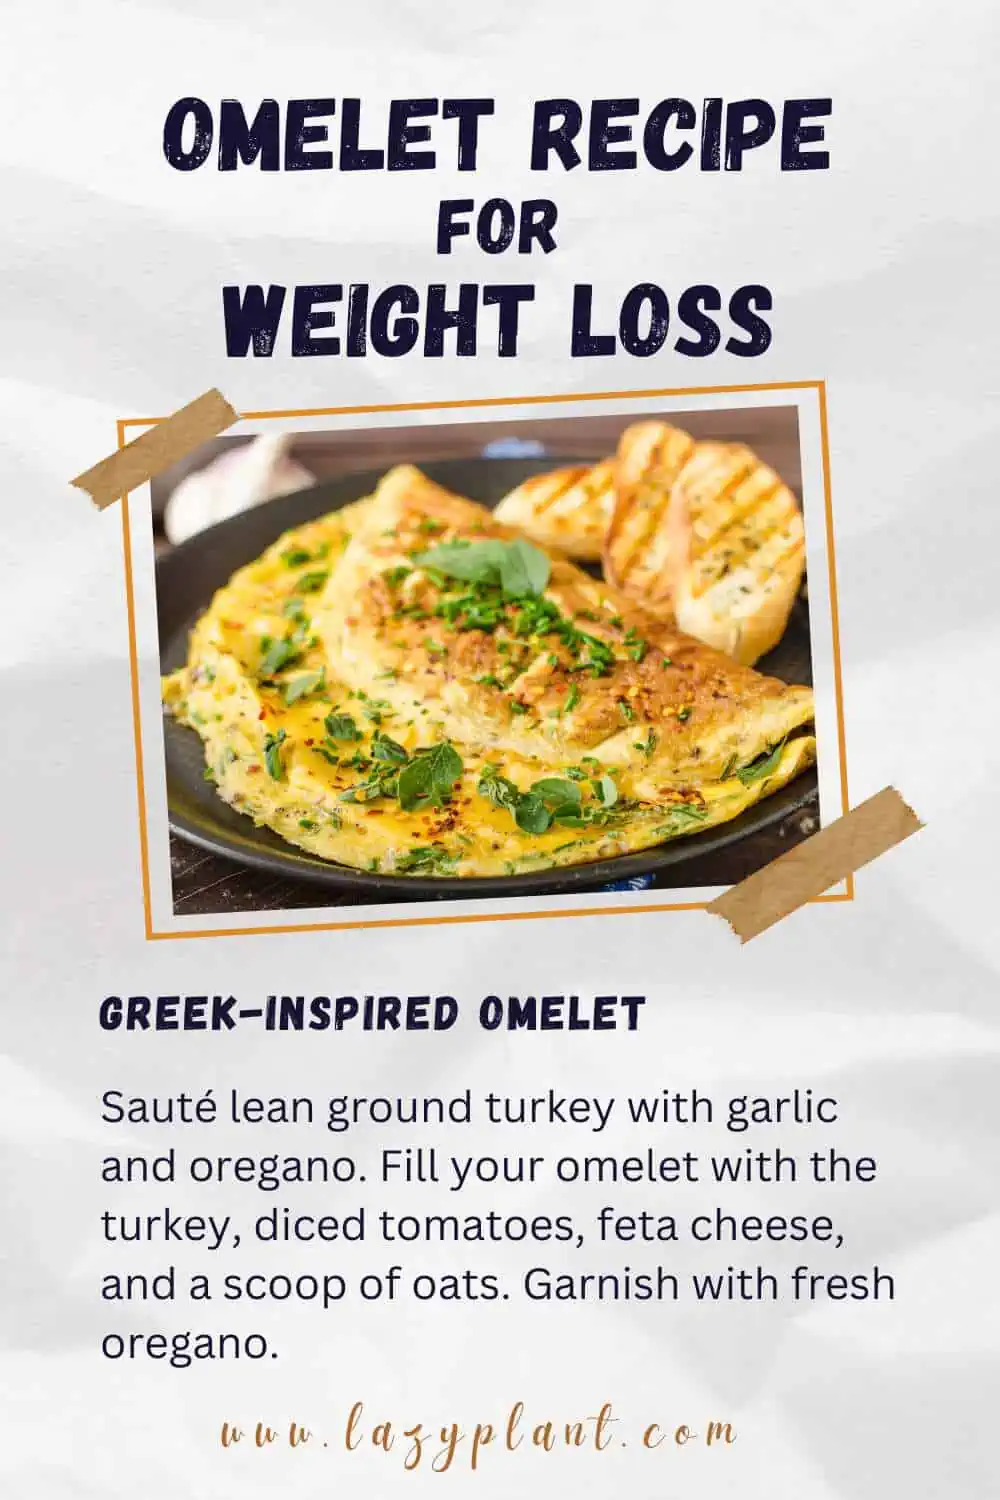 easy & quick omelet recipes for weight loss